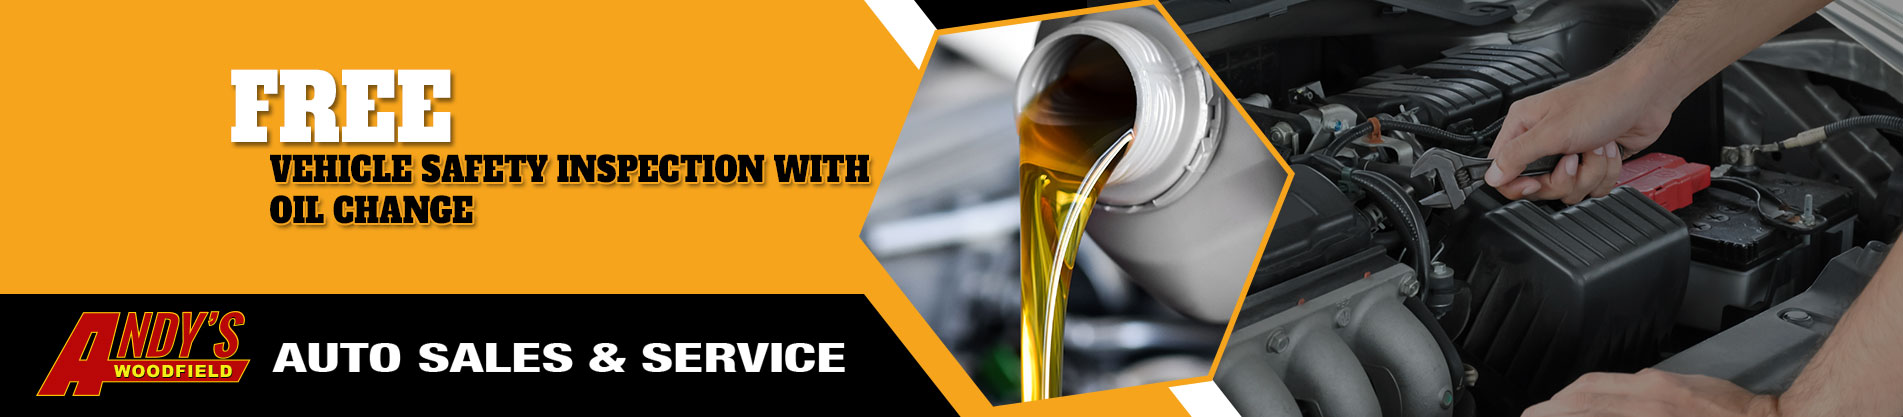 Free vehicle safety inspection with Oil change